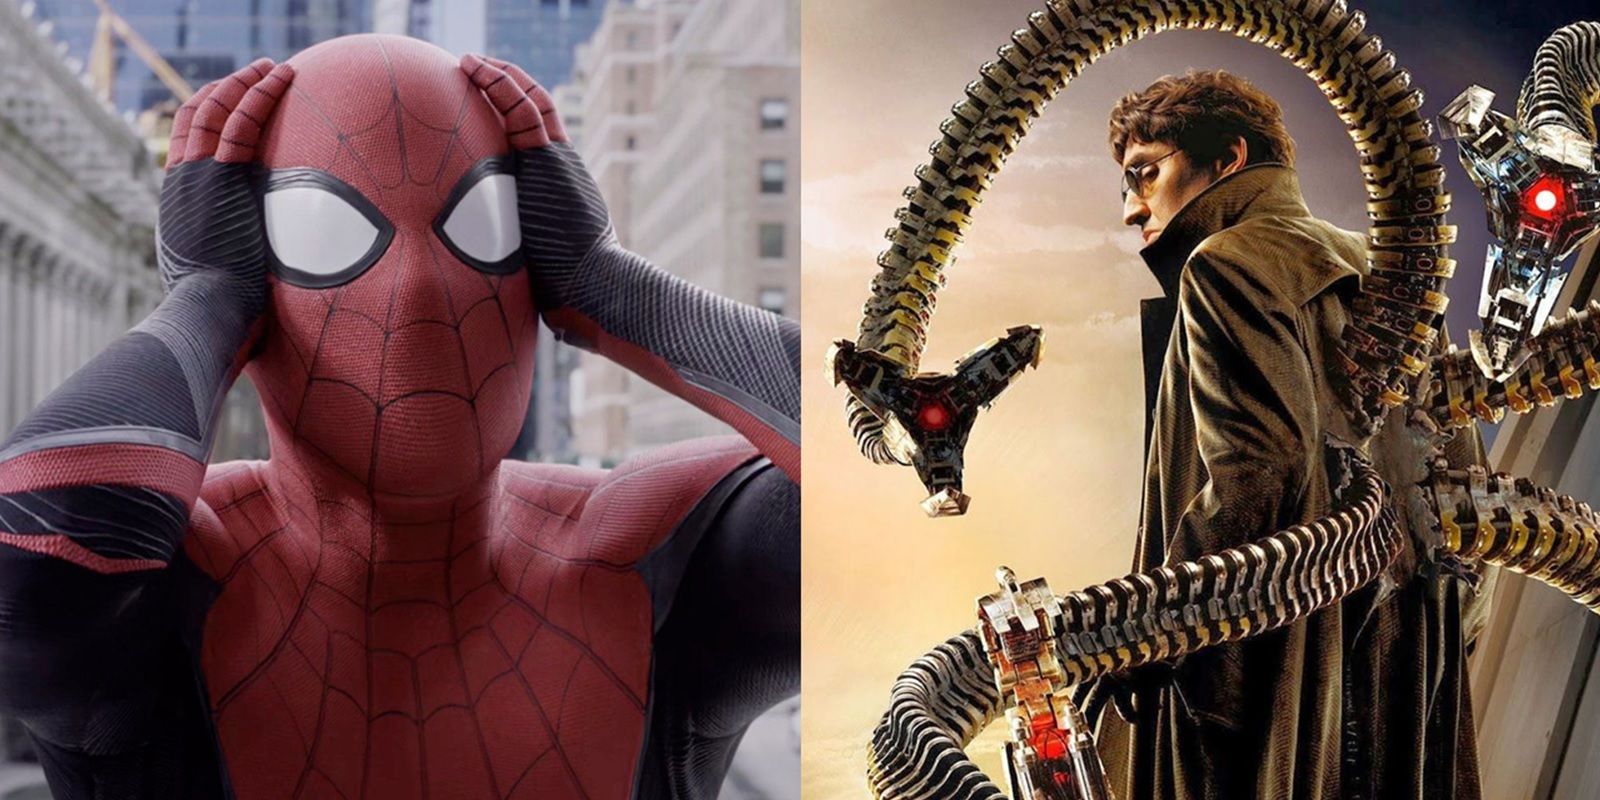 Spider-Man: No Way Home – 10 Ways It Could Drastically Change The MCU